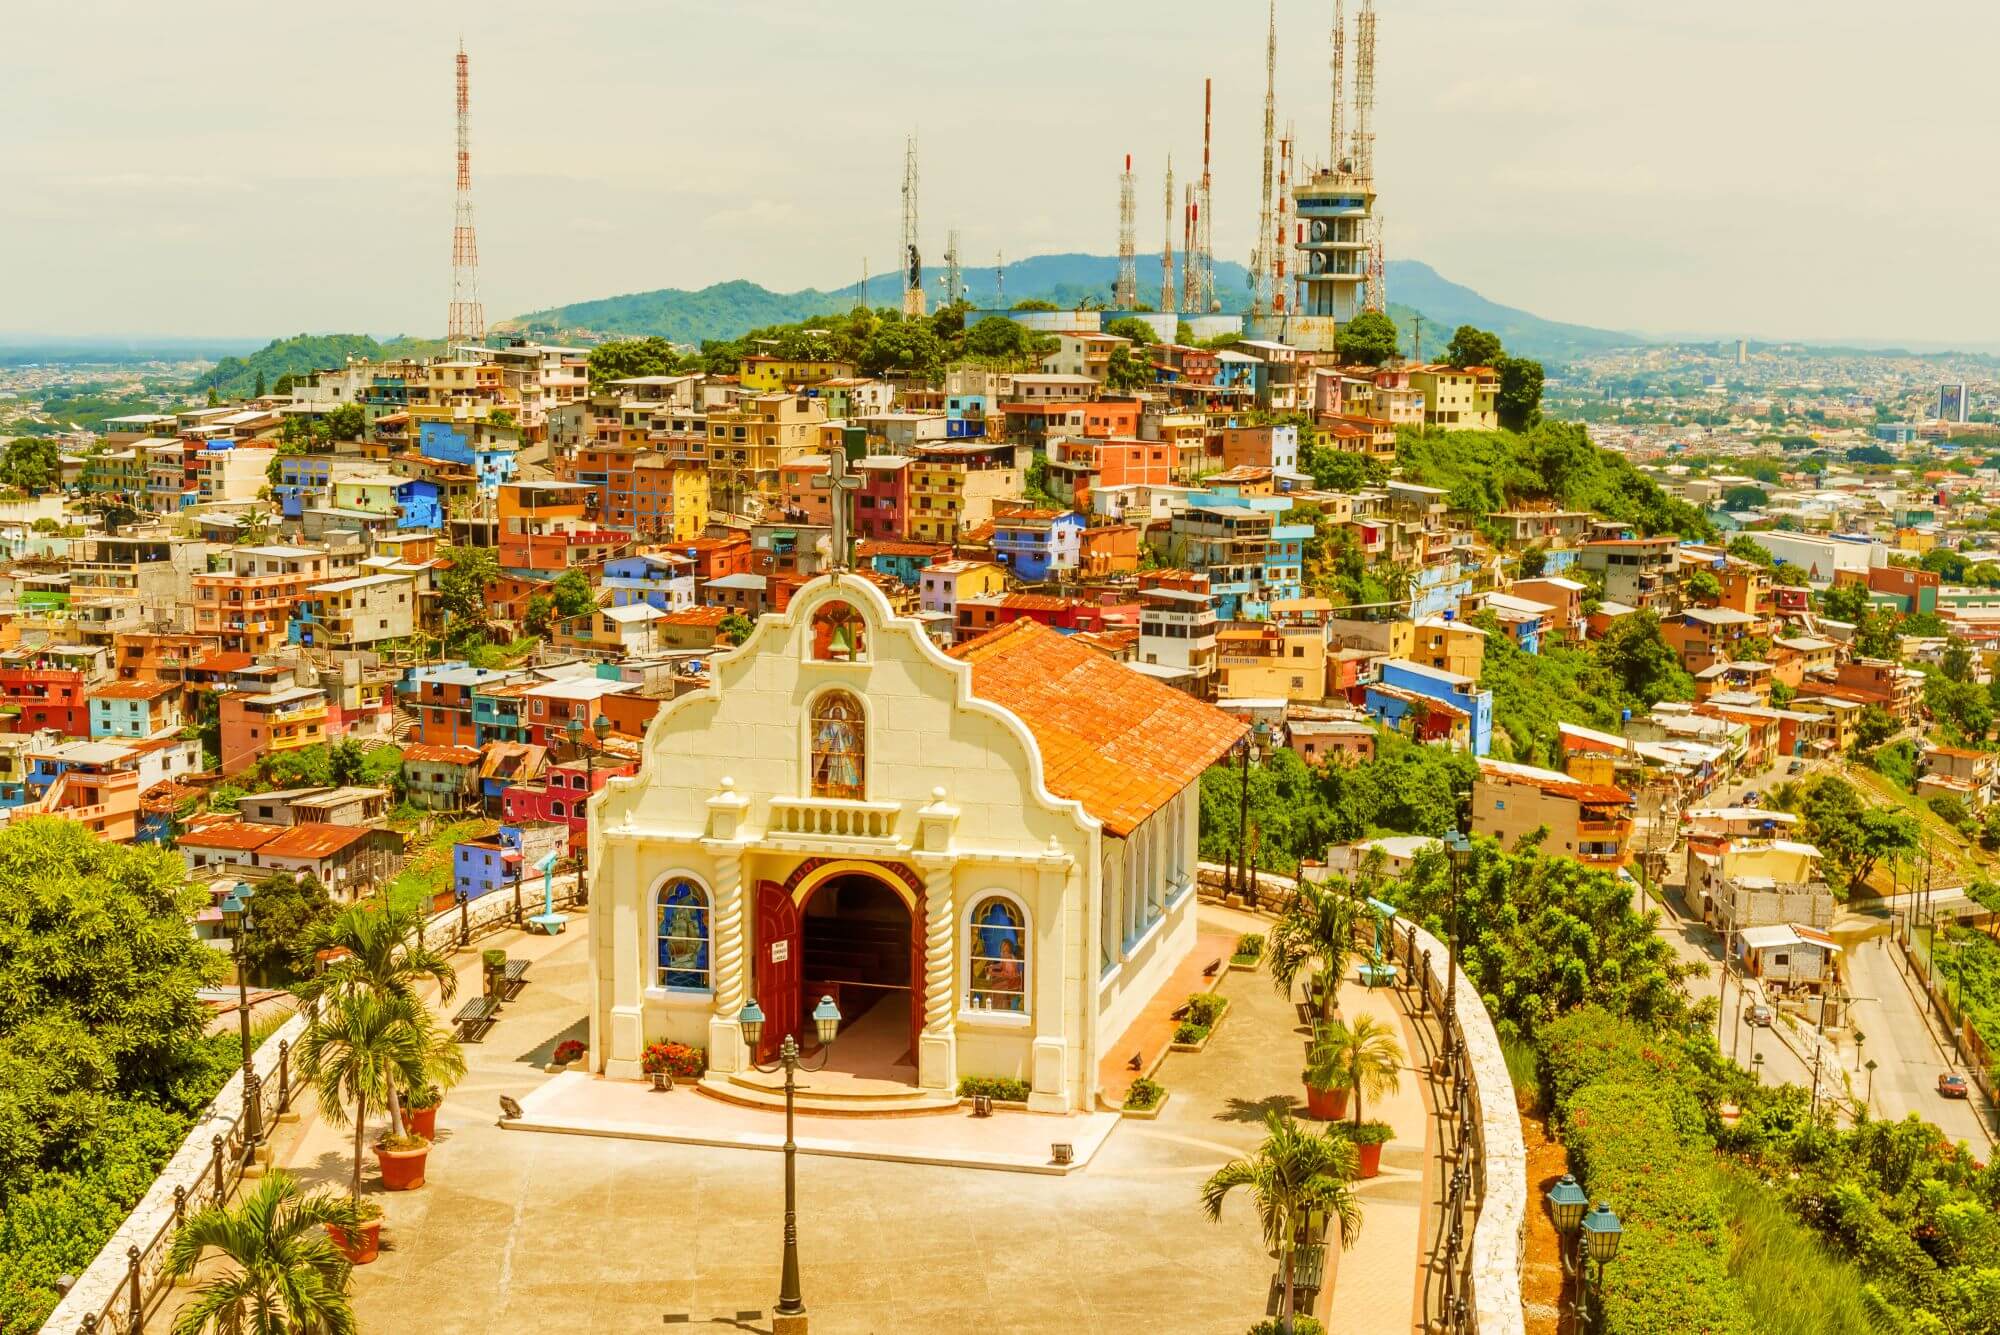 Small Catholic Chapel on the hill surrounded by houses in Cerro Santa Ana Guayaquil